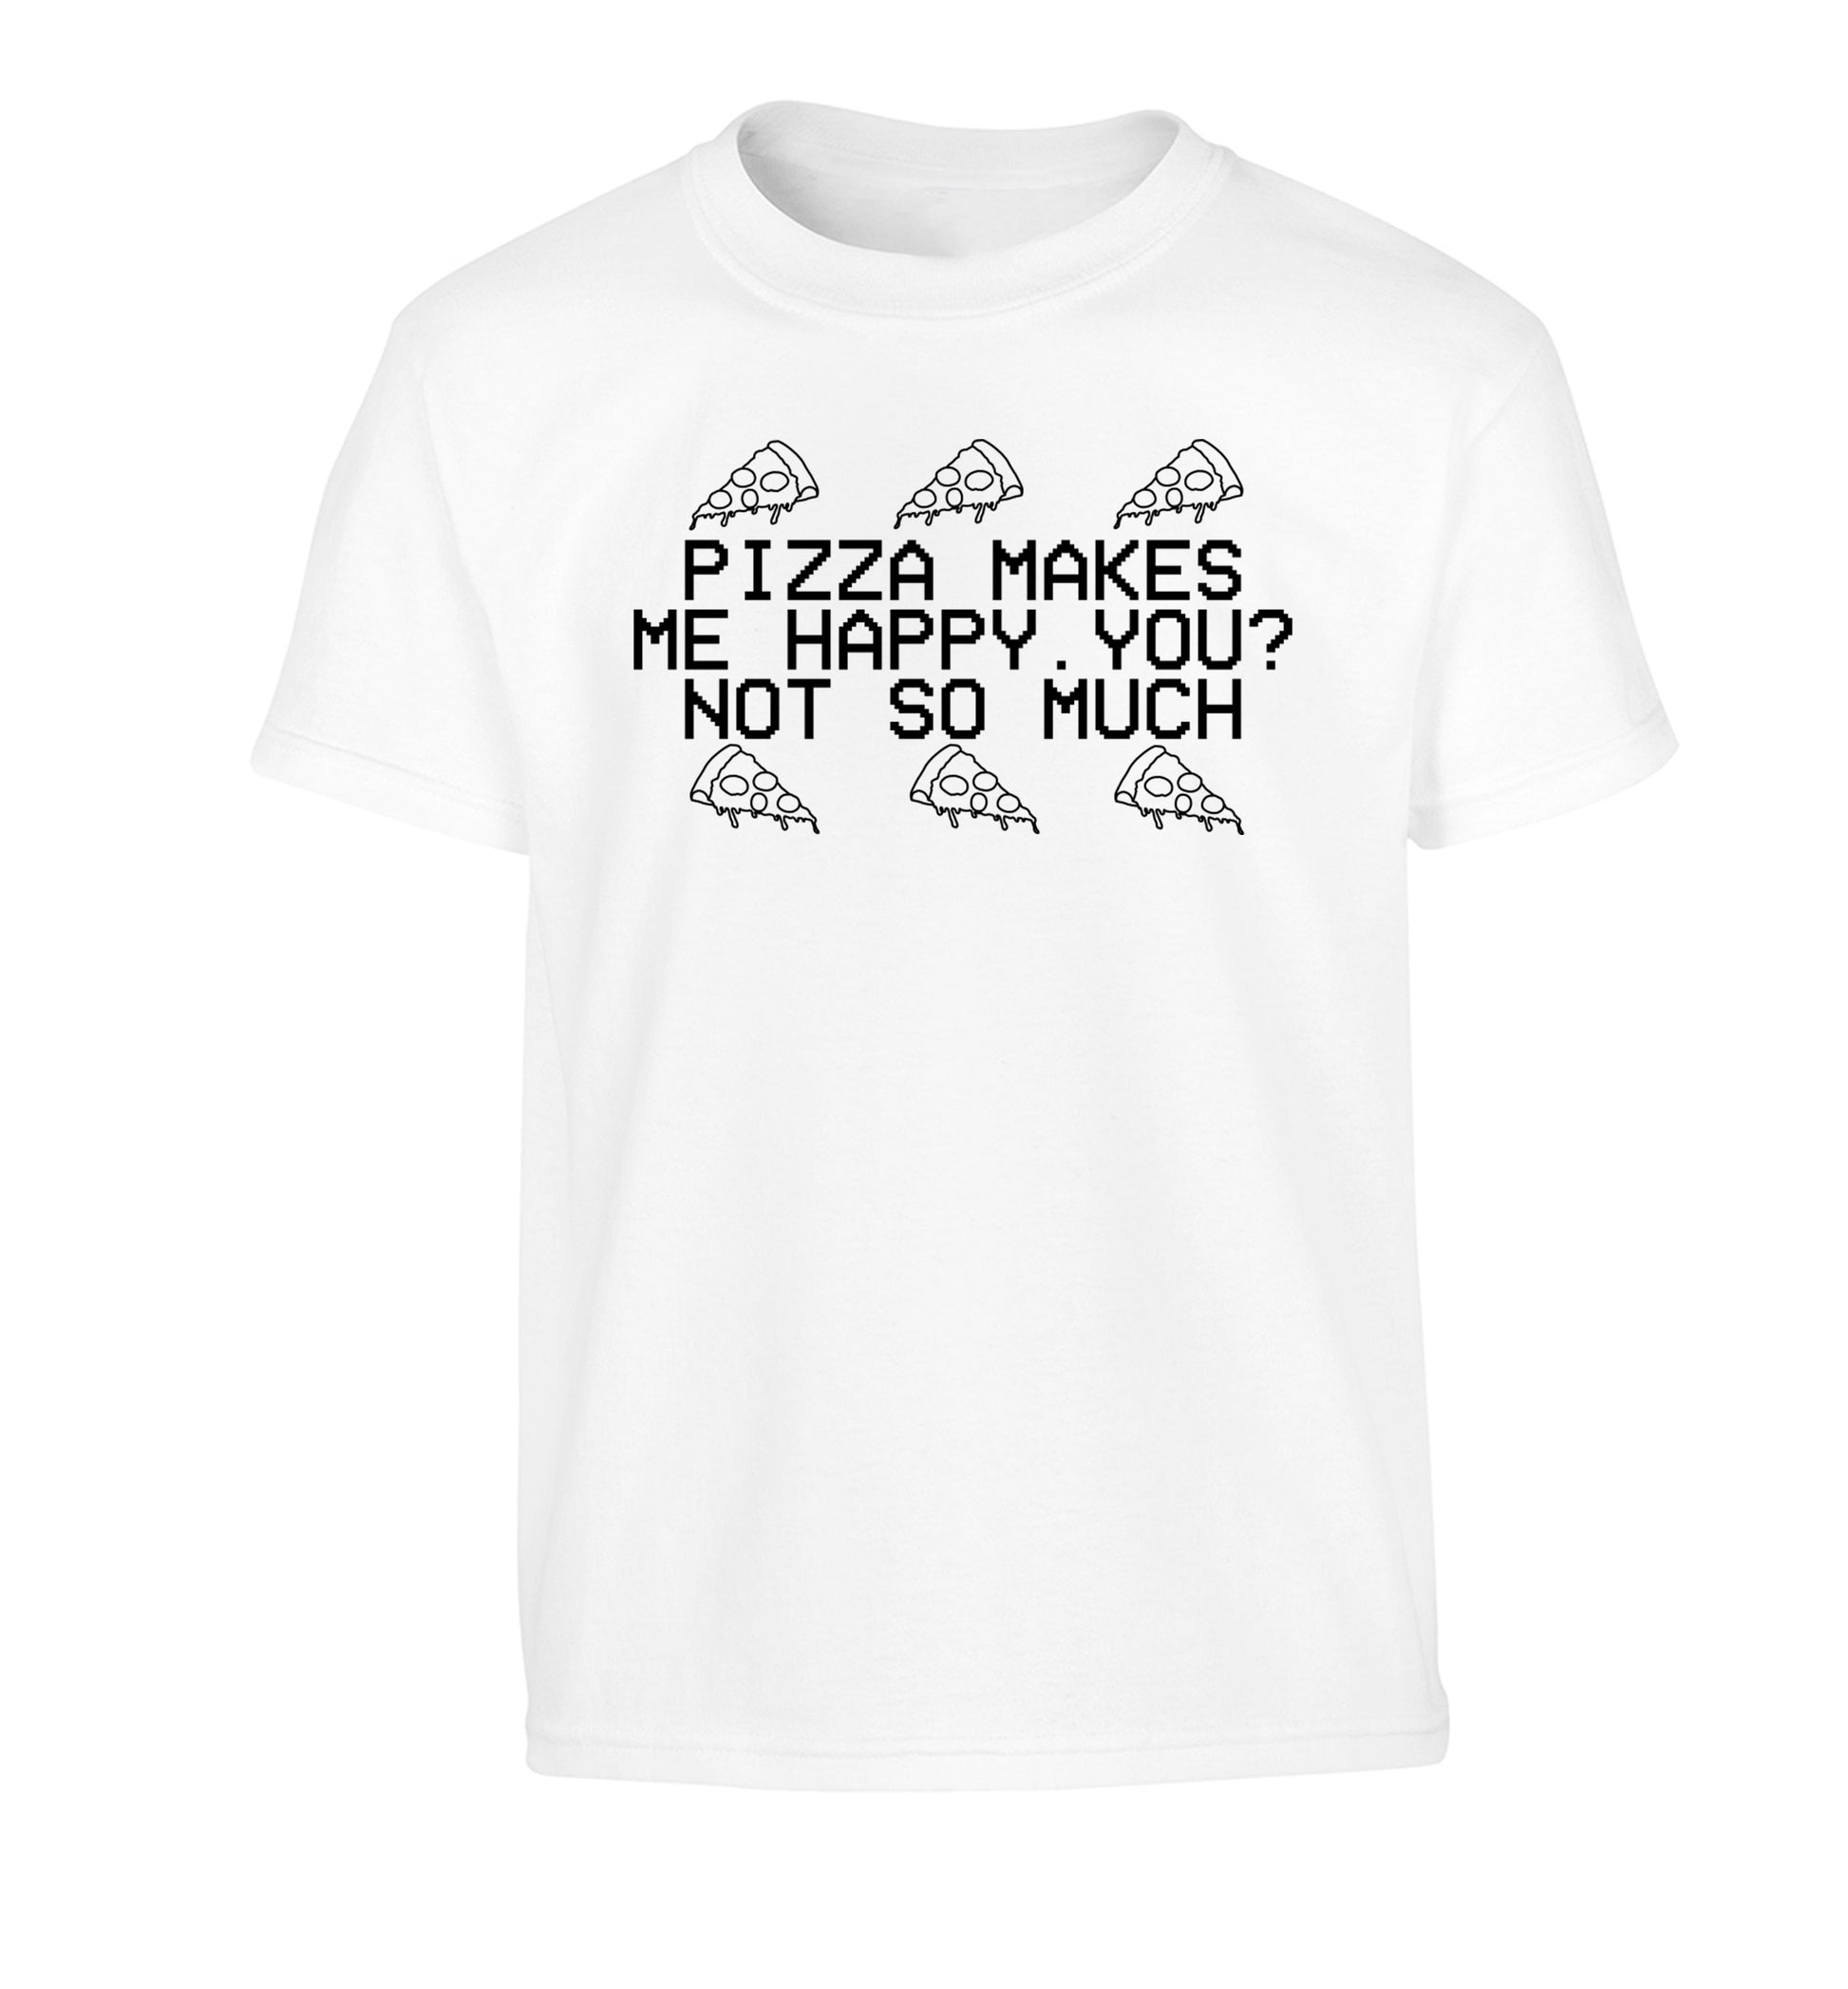 Pizza makes me happy, You? Not so much Children's white Tshirt 12-14 Years